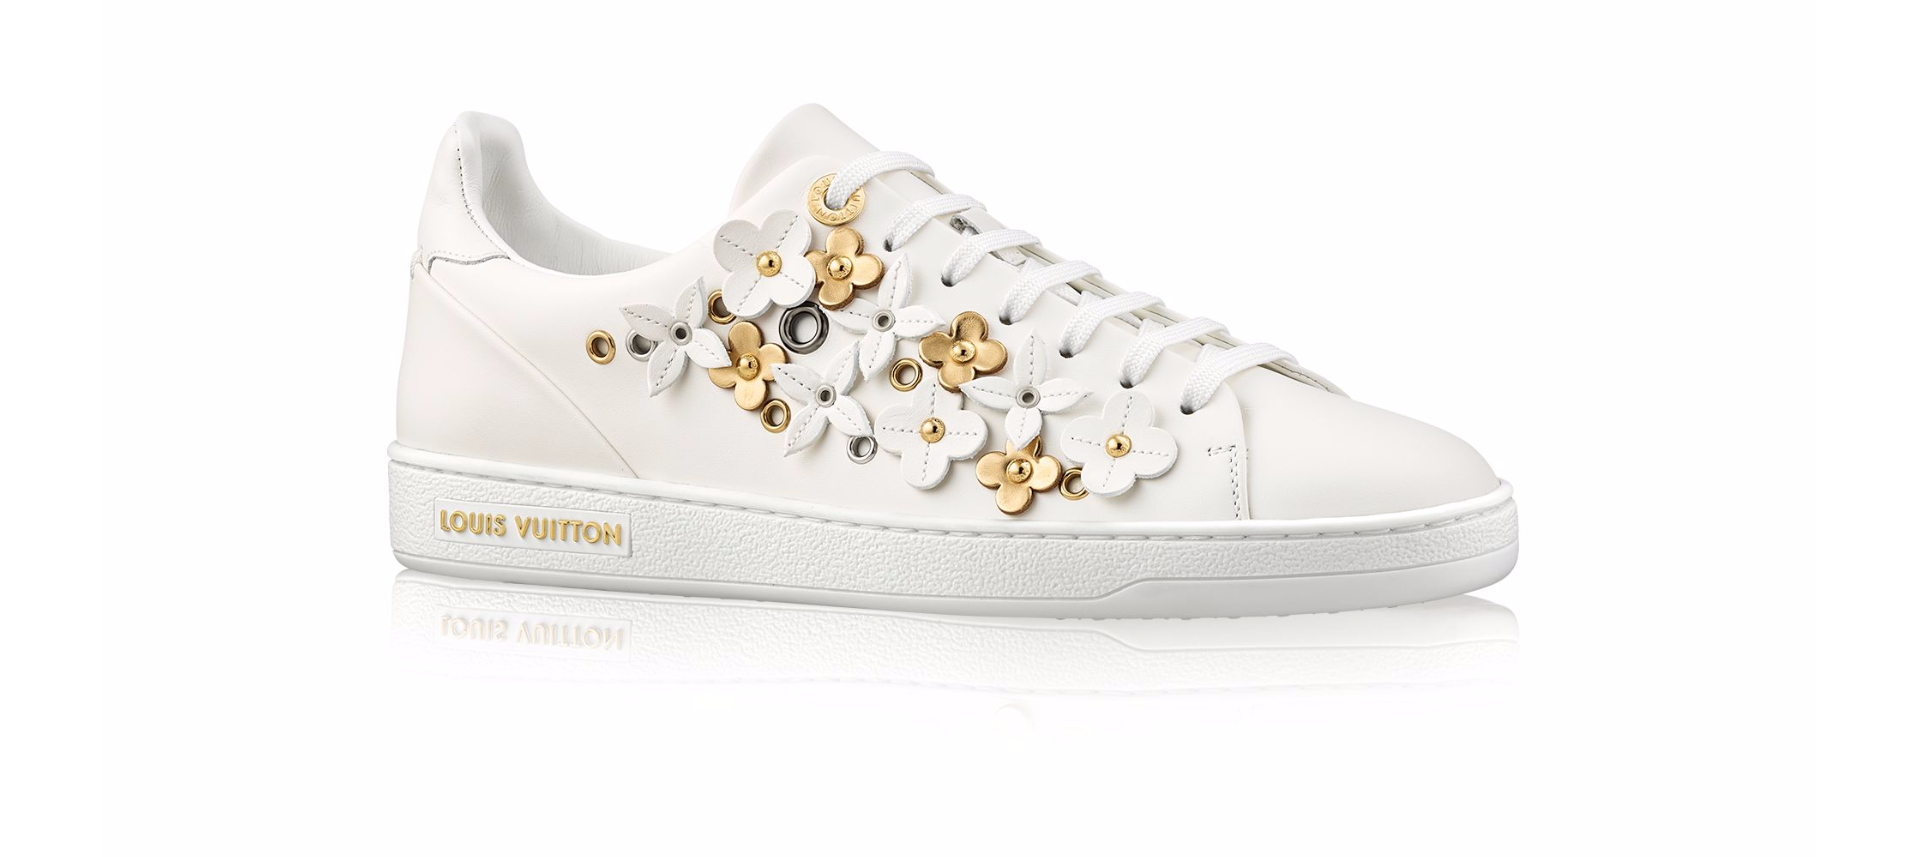 White Sneakers: A Must-Have Luxury Fashion Trend